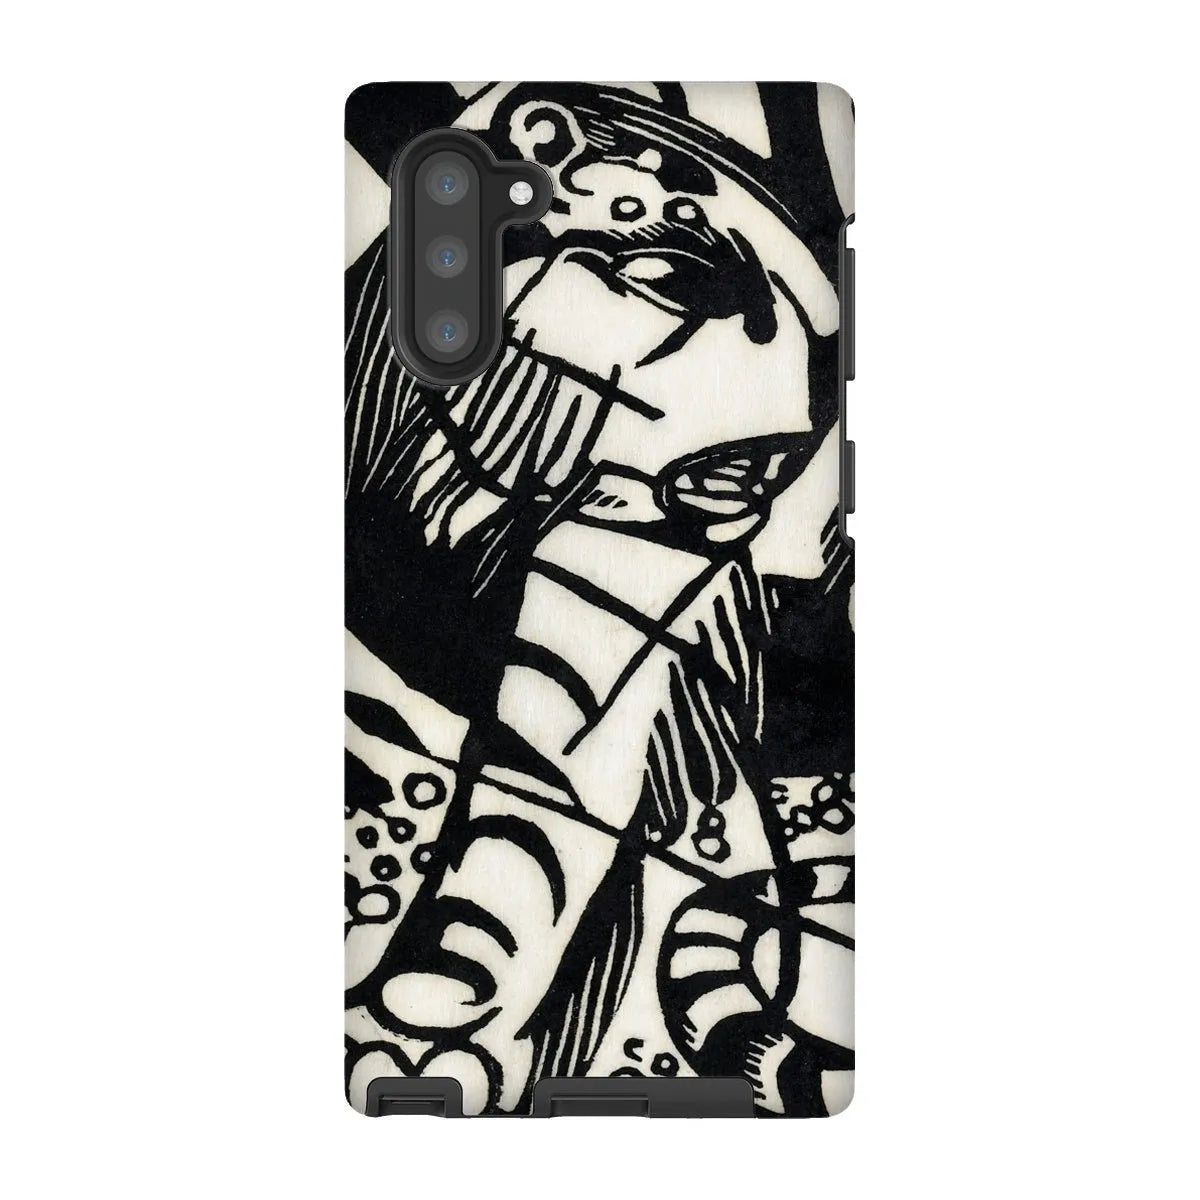 Tiger - Animal Aesthetic Phone Case - Franz Marc - Samsung Galaxy Note 10 / Matte - Mobile Phone Cases - Aesthetic Art